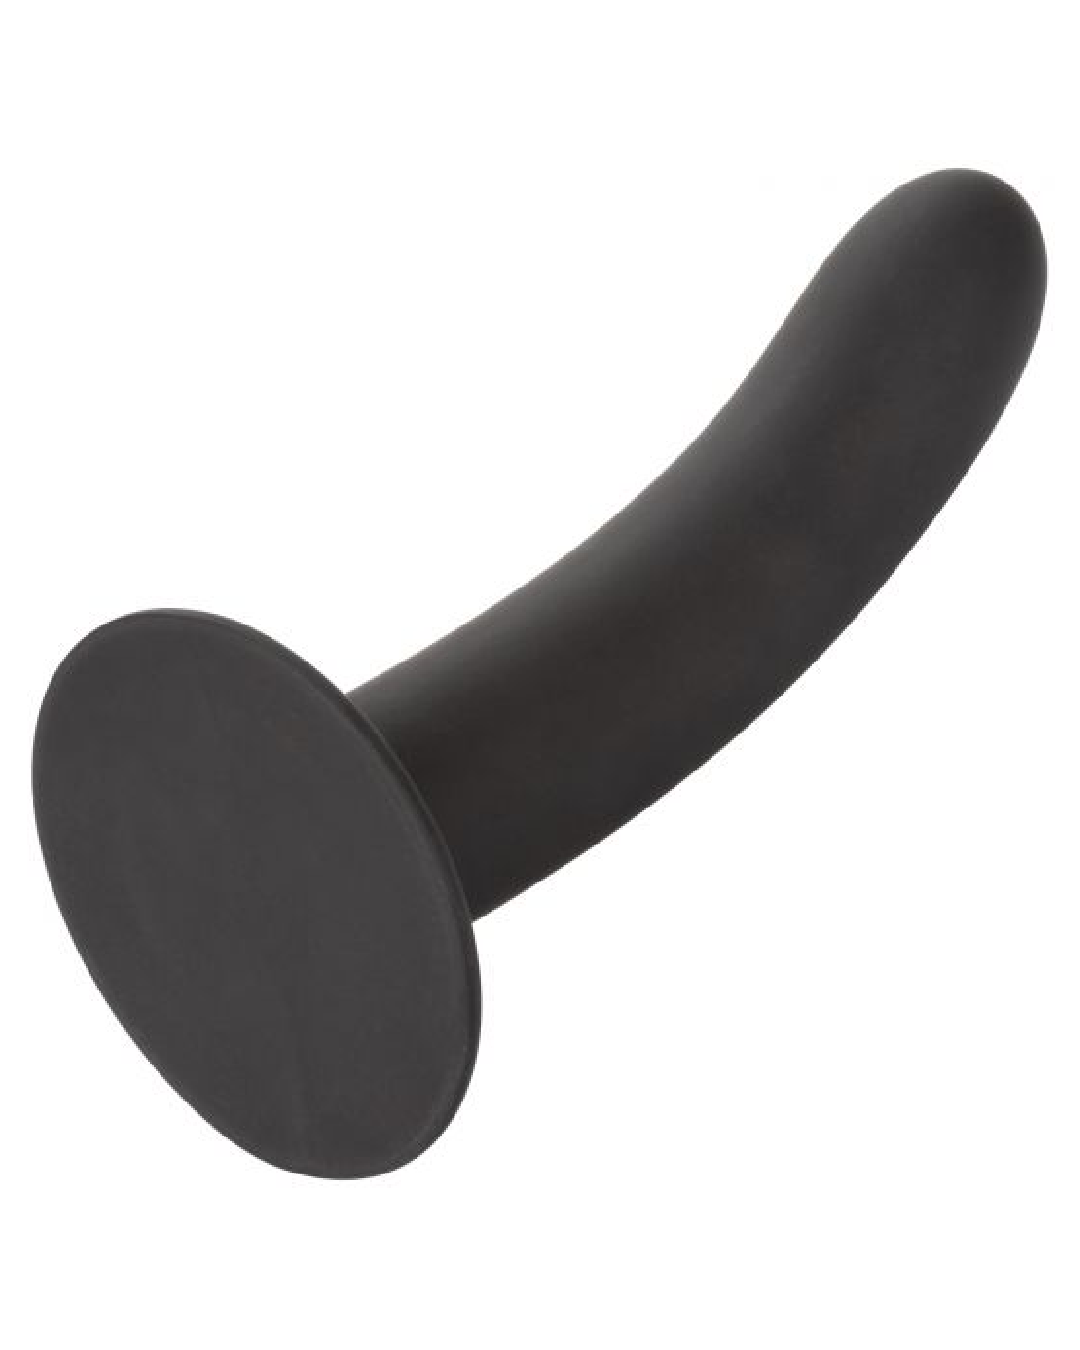 Boundless 7 Inch Smooth Silicone Dildo - Black tilted to show the suction cup base